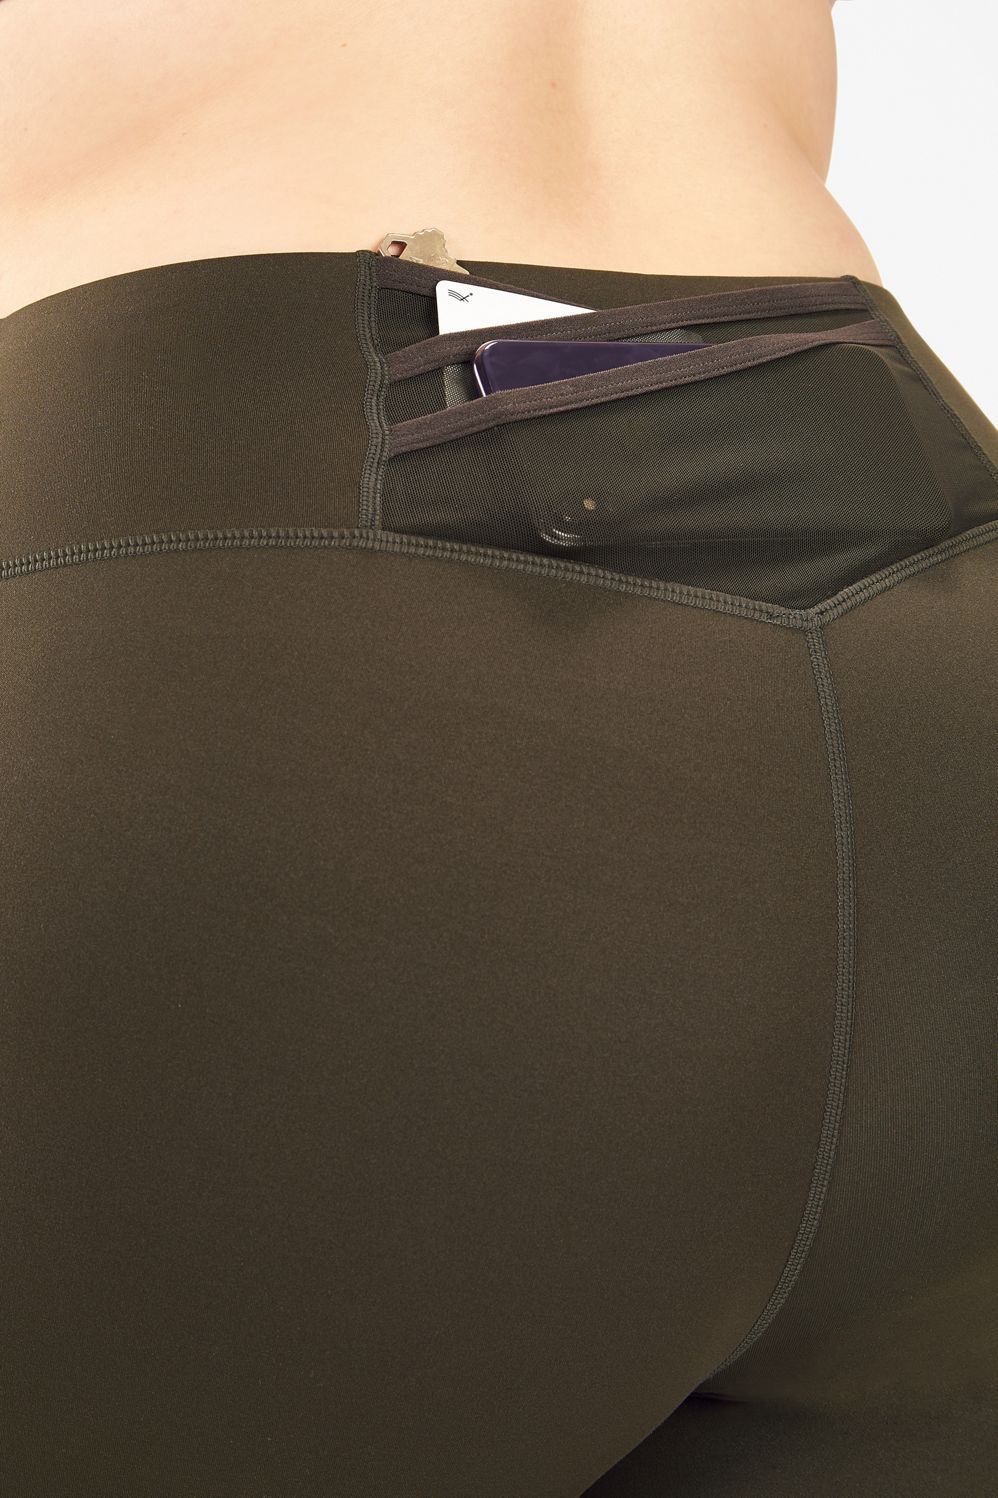 Fabletics Review - Trinity High-Waisted Pocket Capri — The Athleisurely Life